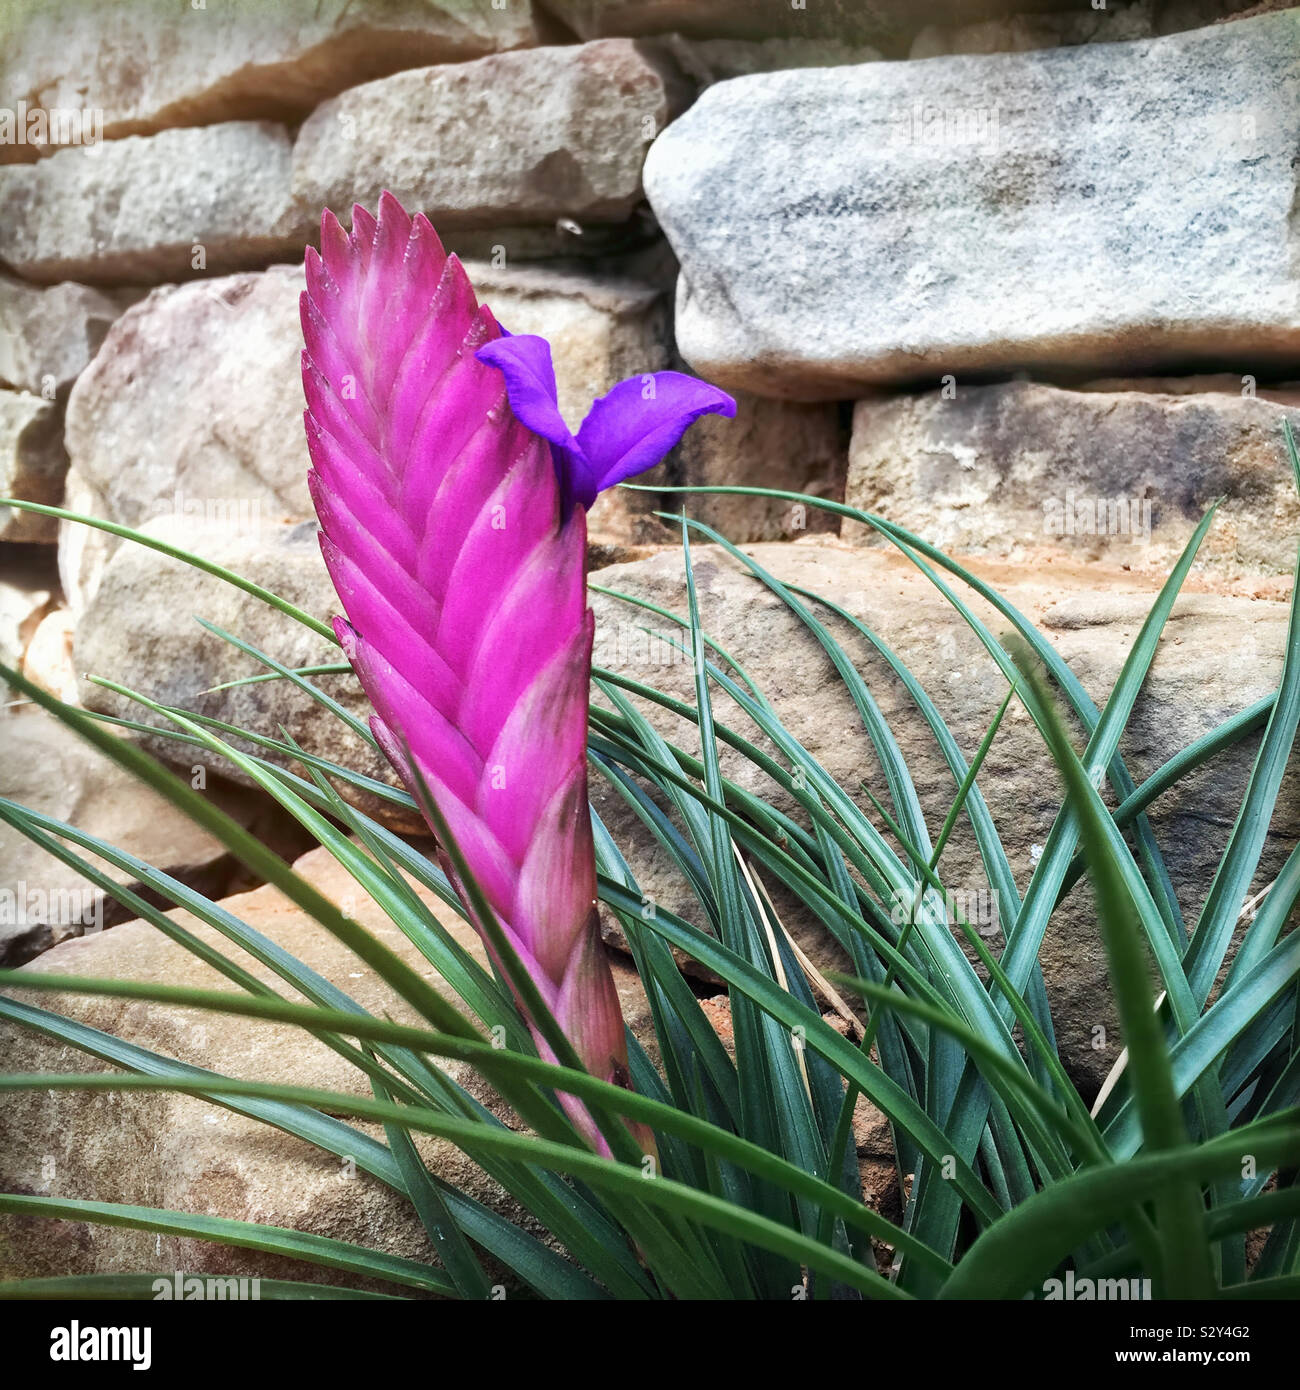 Pink Quill flower is a tropical plant and is in the bromeliad family. The pink area is the spike where violet colored blossoms bloom. Focus on flower spike in the foreground. Stock Photo